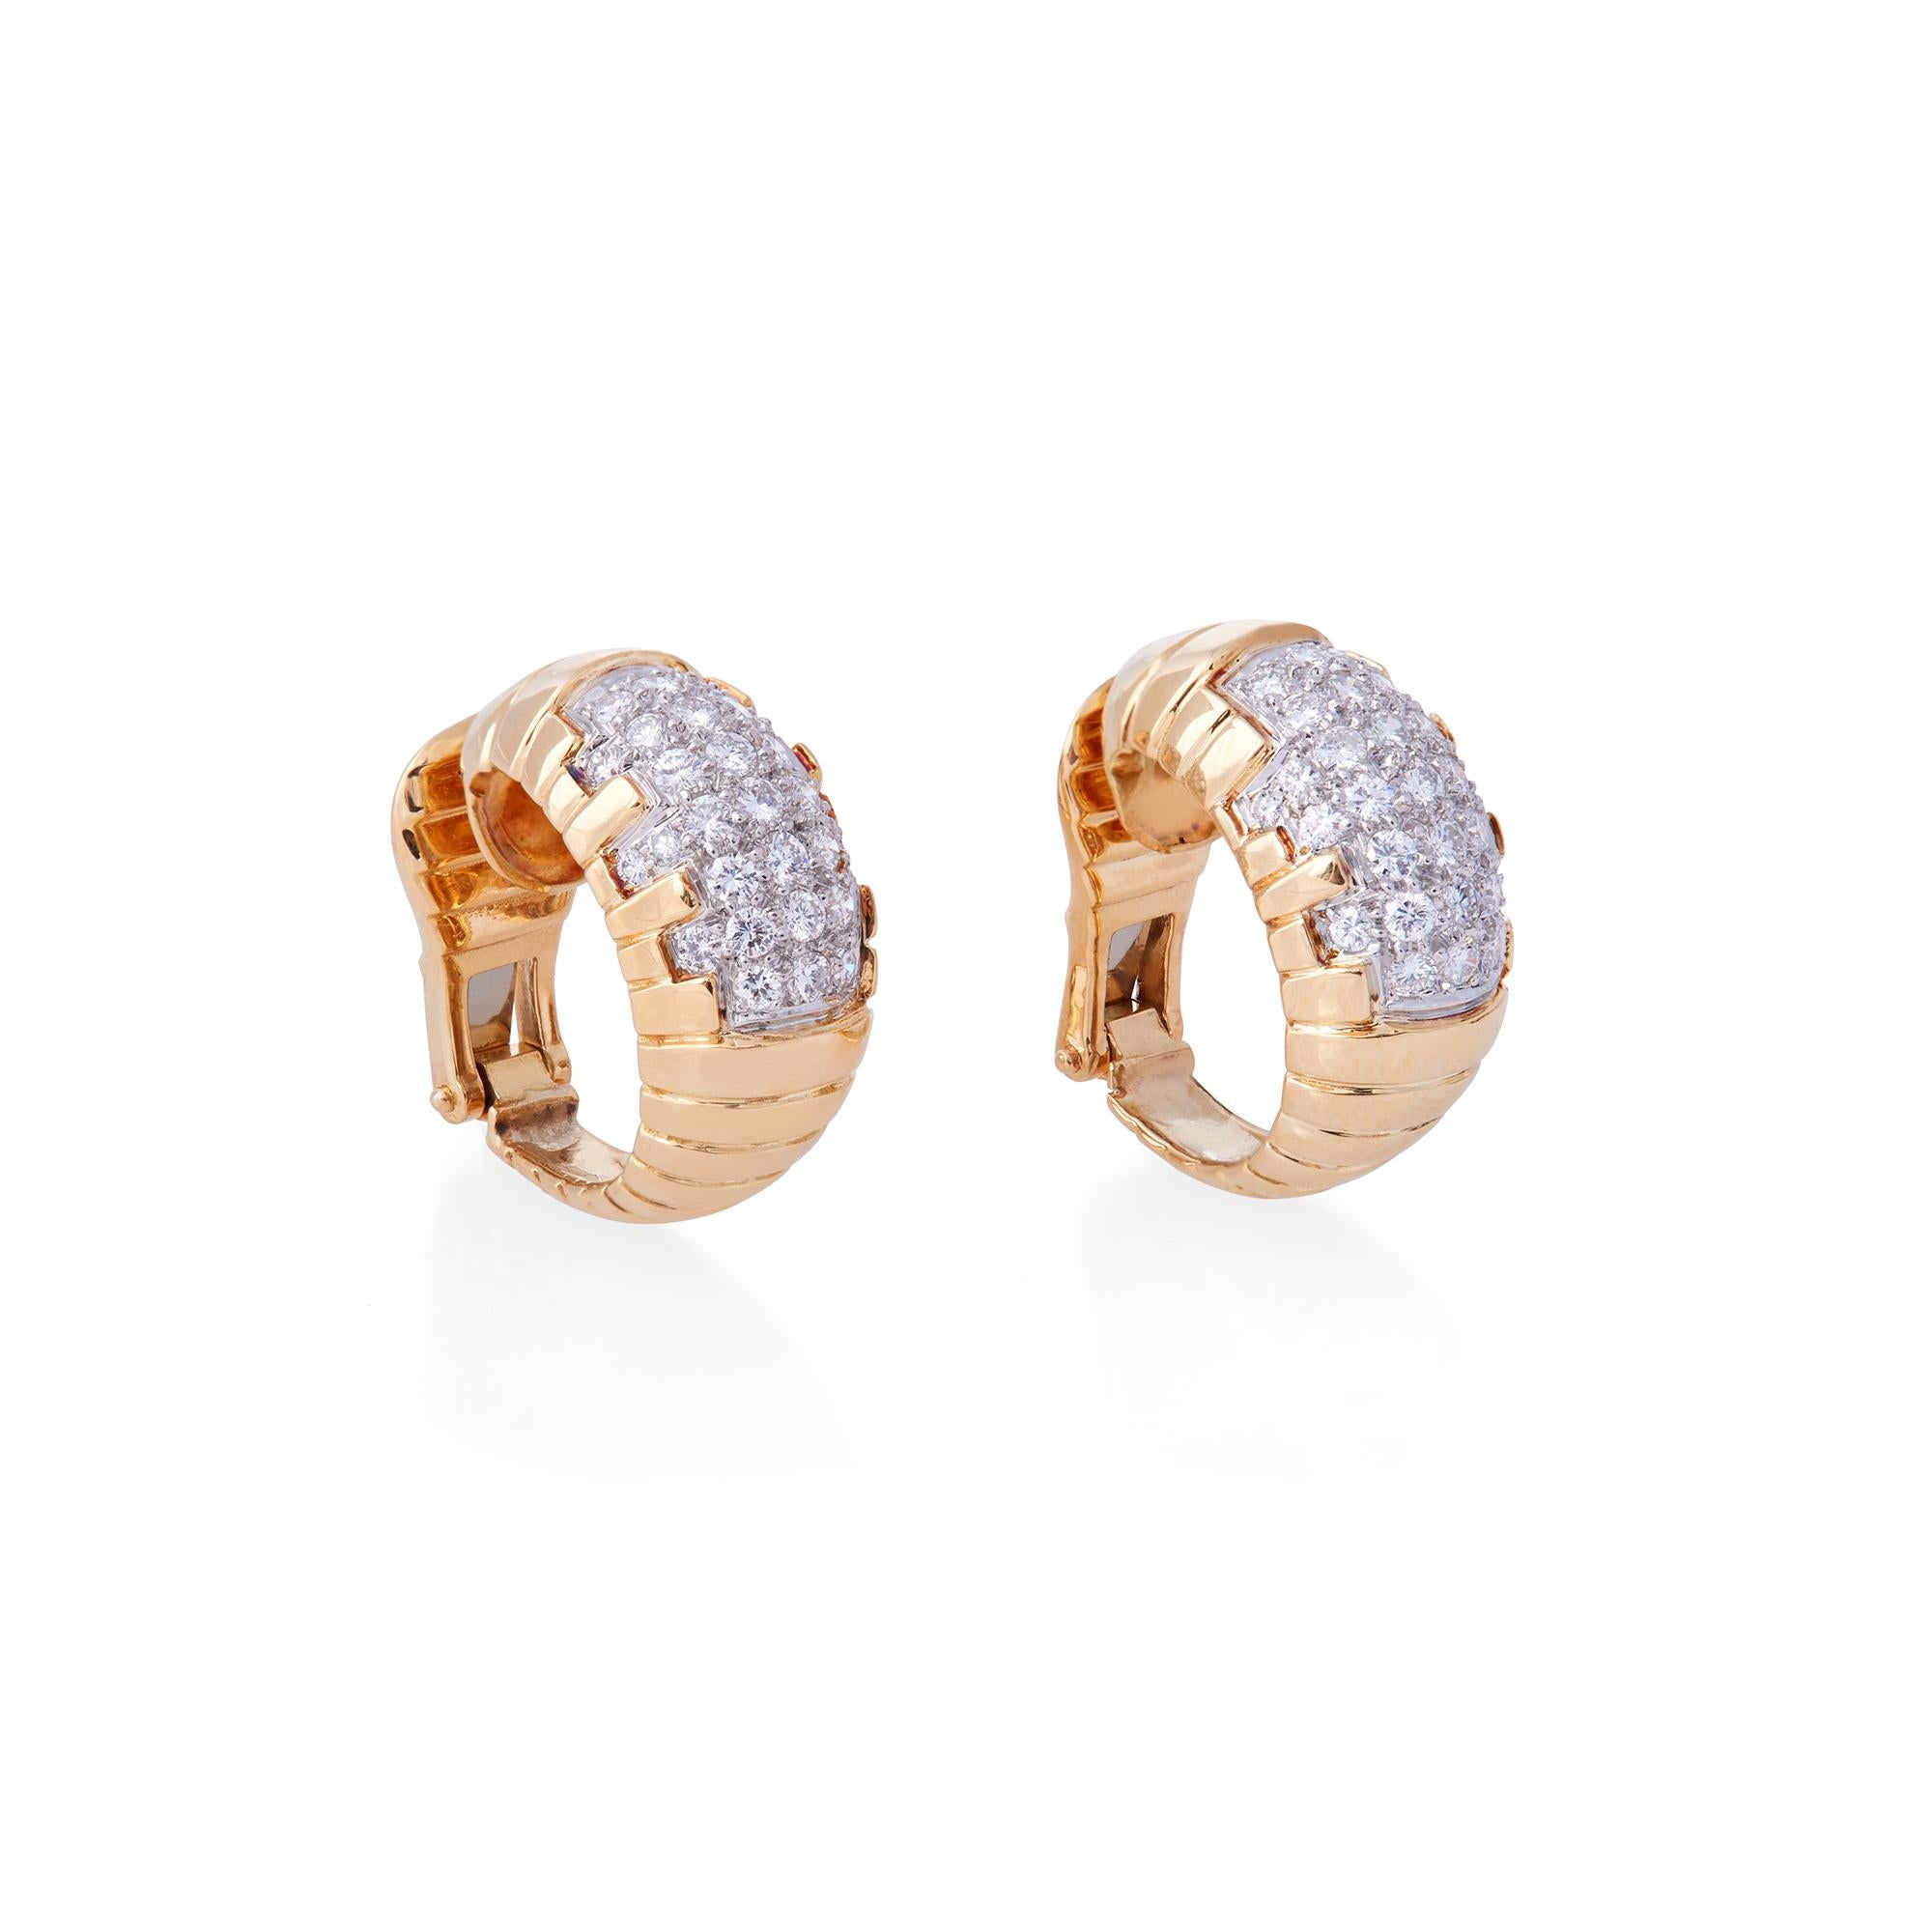 A charming pair of huggie hoop earrings crafted in 18 karat yellow gold.  The high polished gold features a ribbed design with approximately 1.6 carats of round cut diamonds set in a cutout design at the center of each earring.  The earrings measure